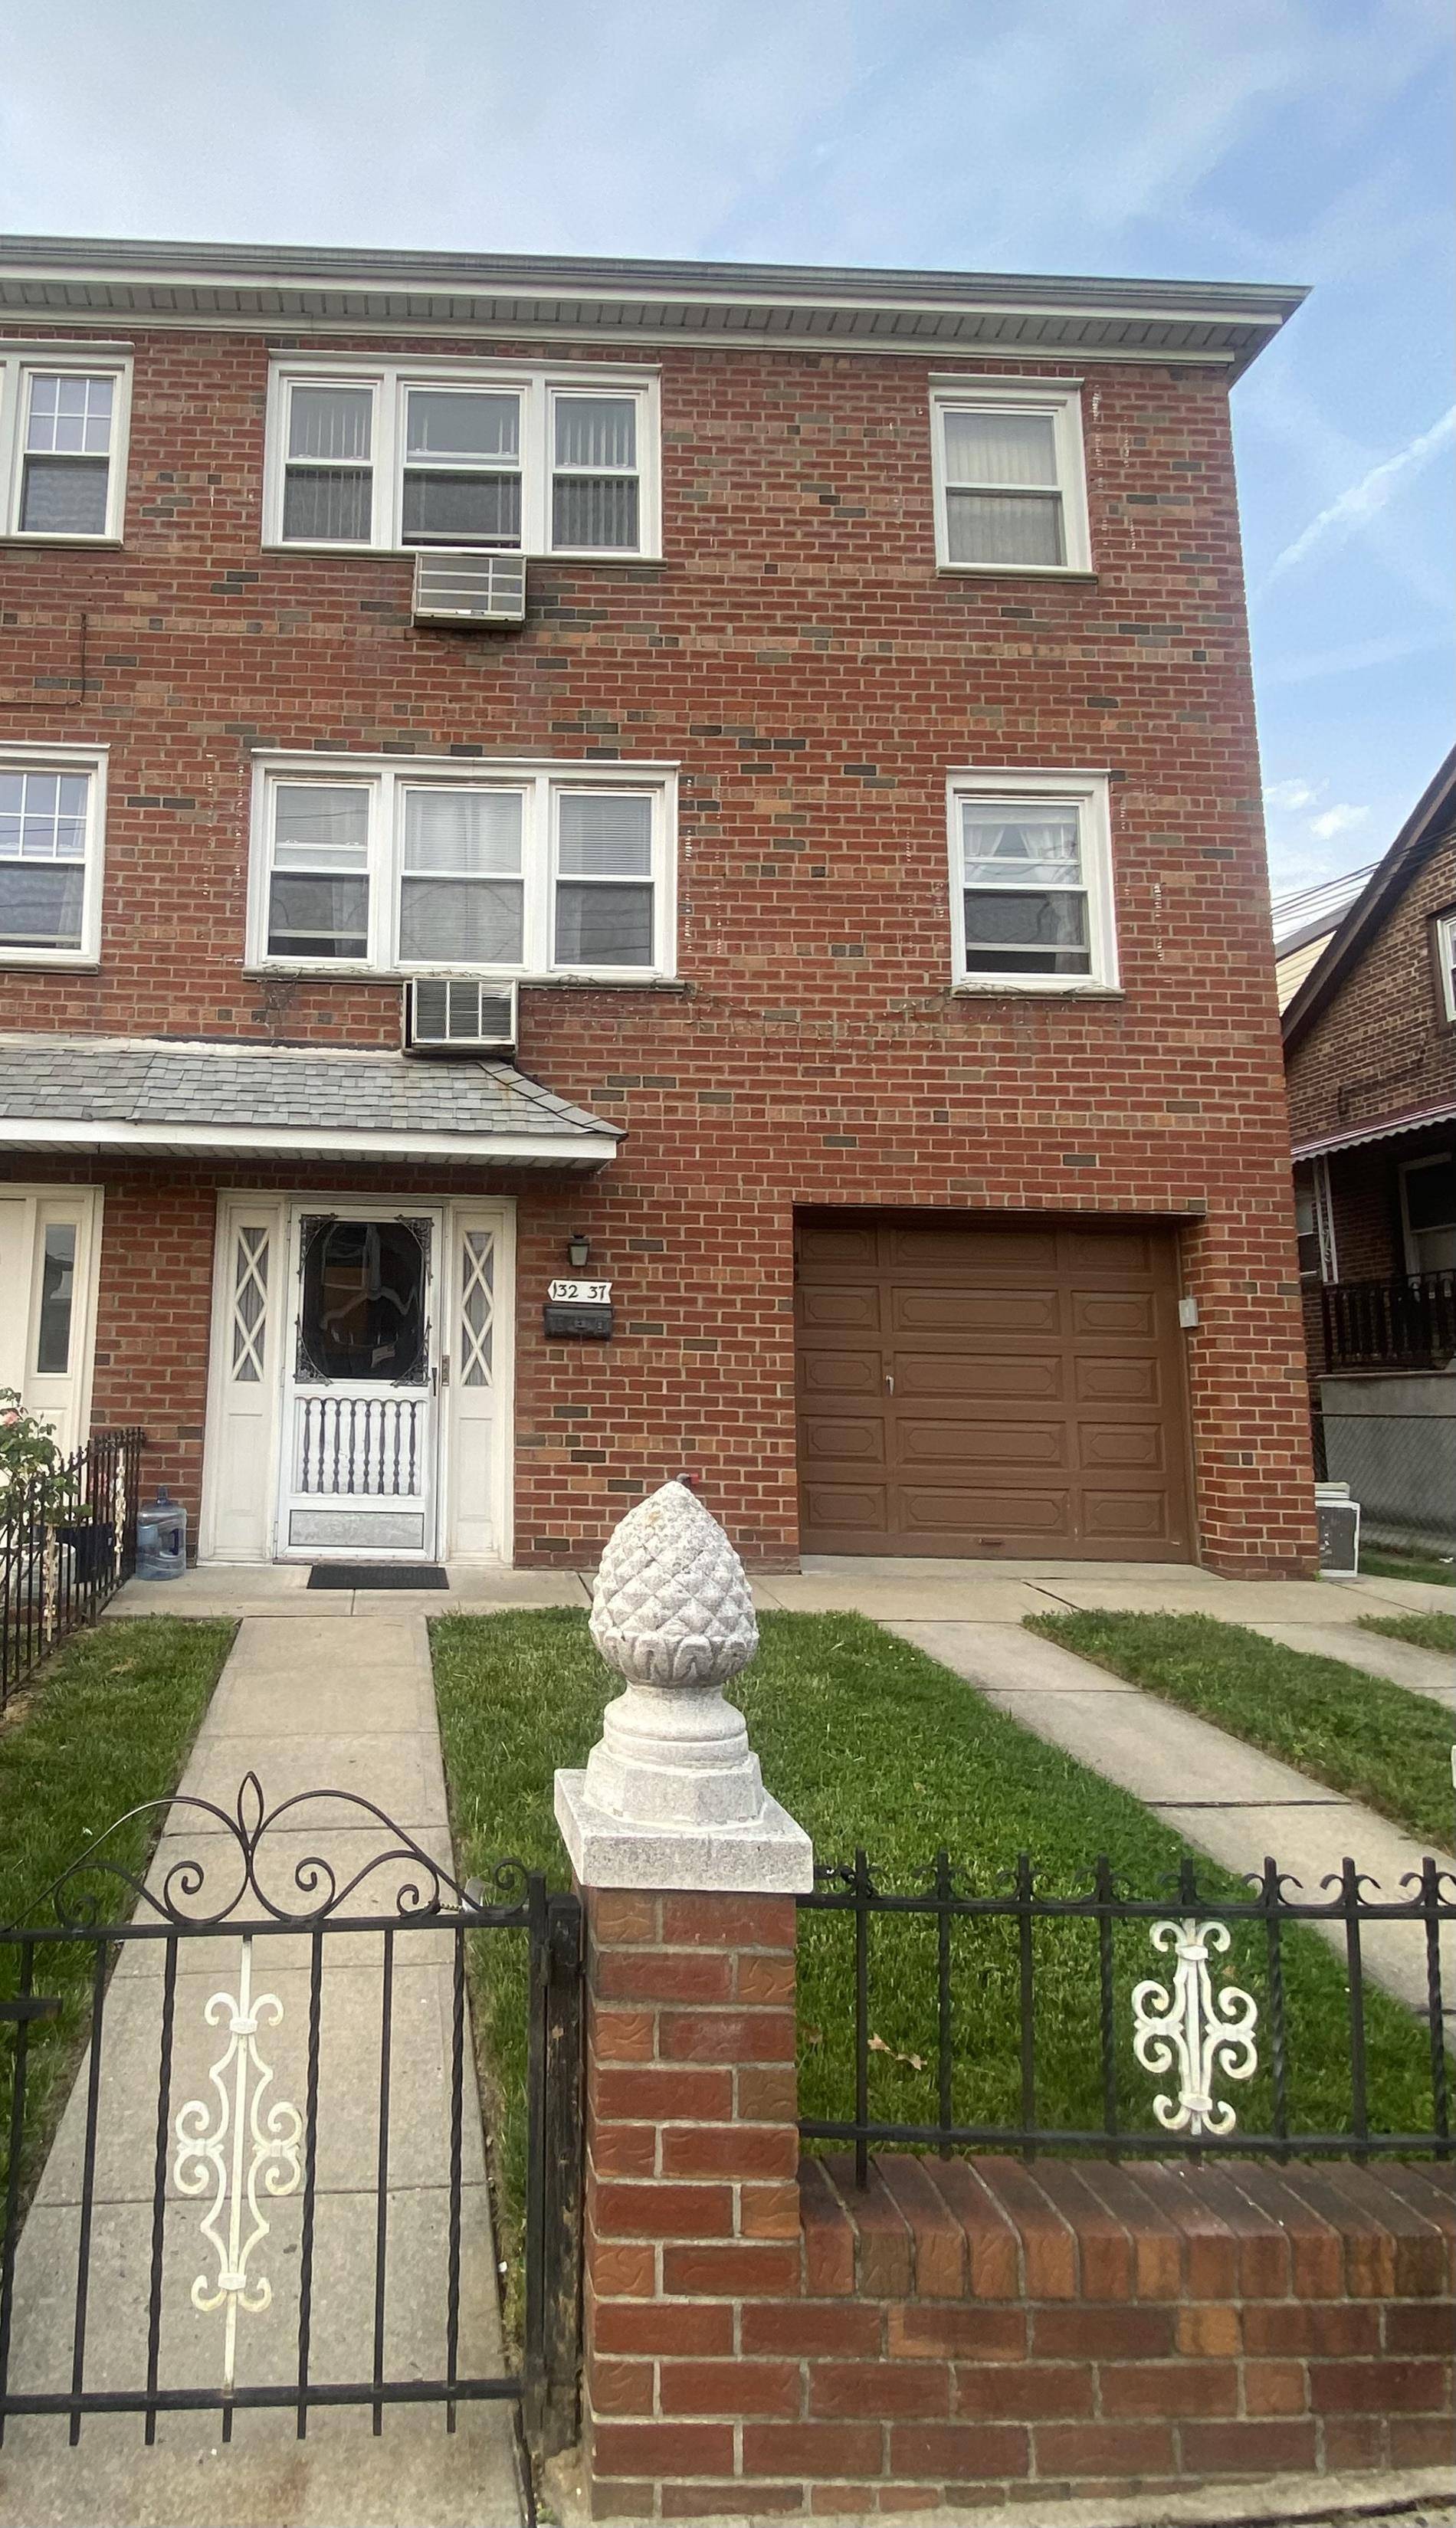 Welcome to this beautiful 2 Family brick house in the heart of Flushing.